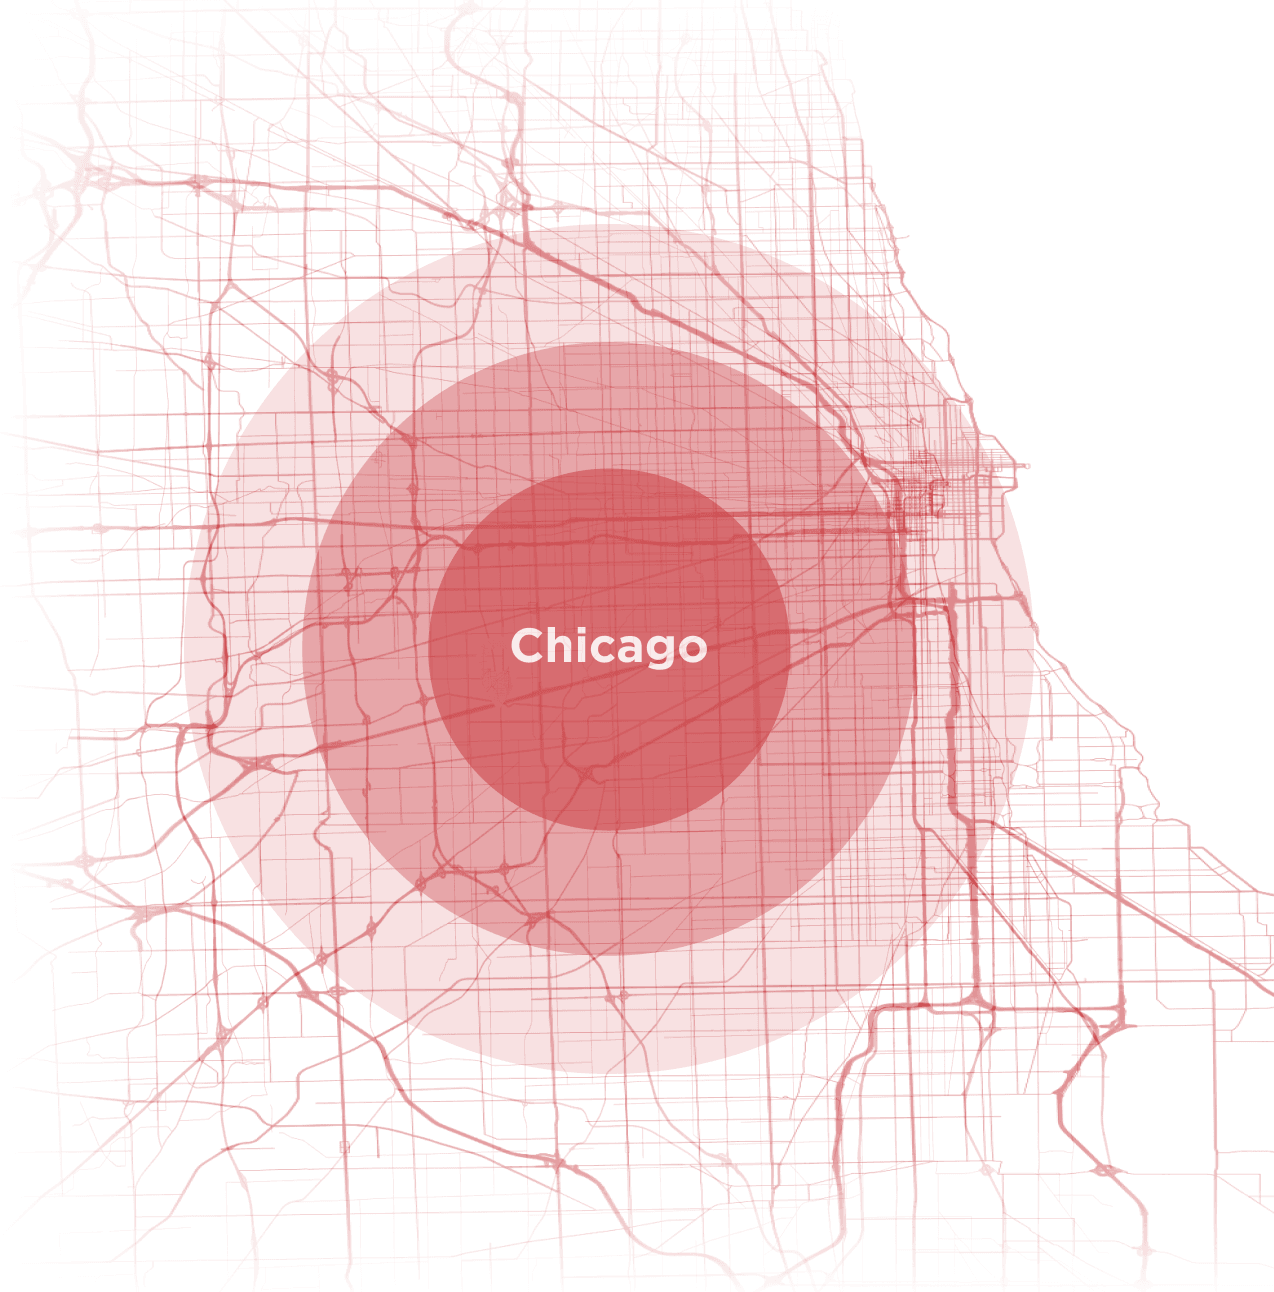 grid style map of Chicago